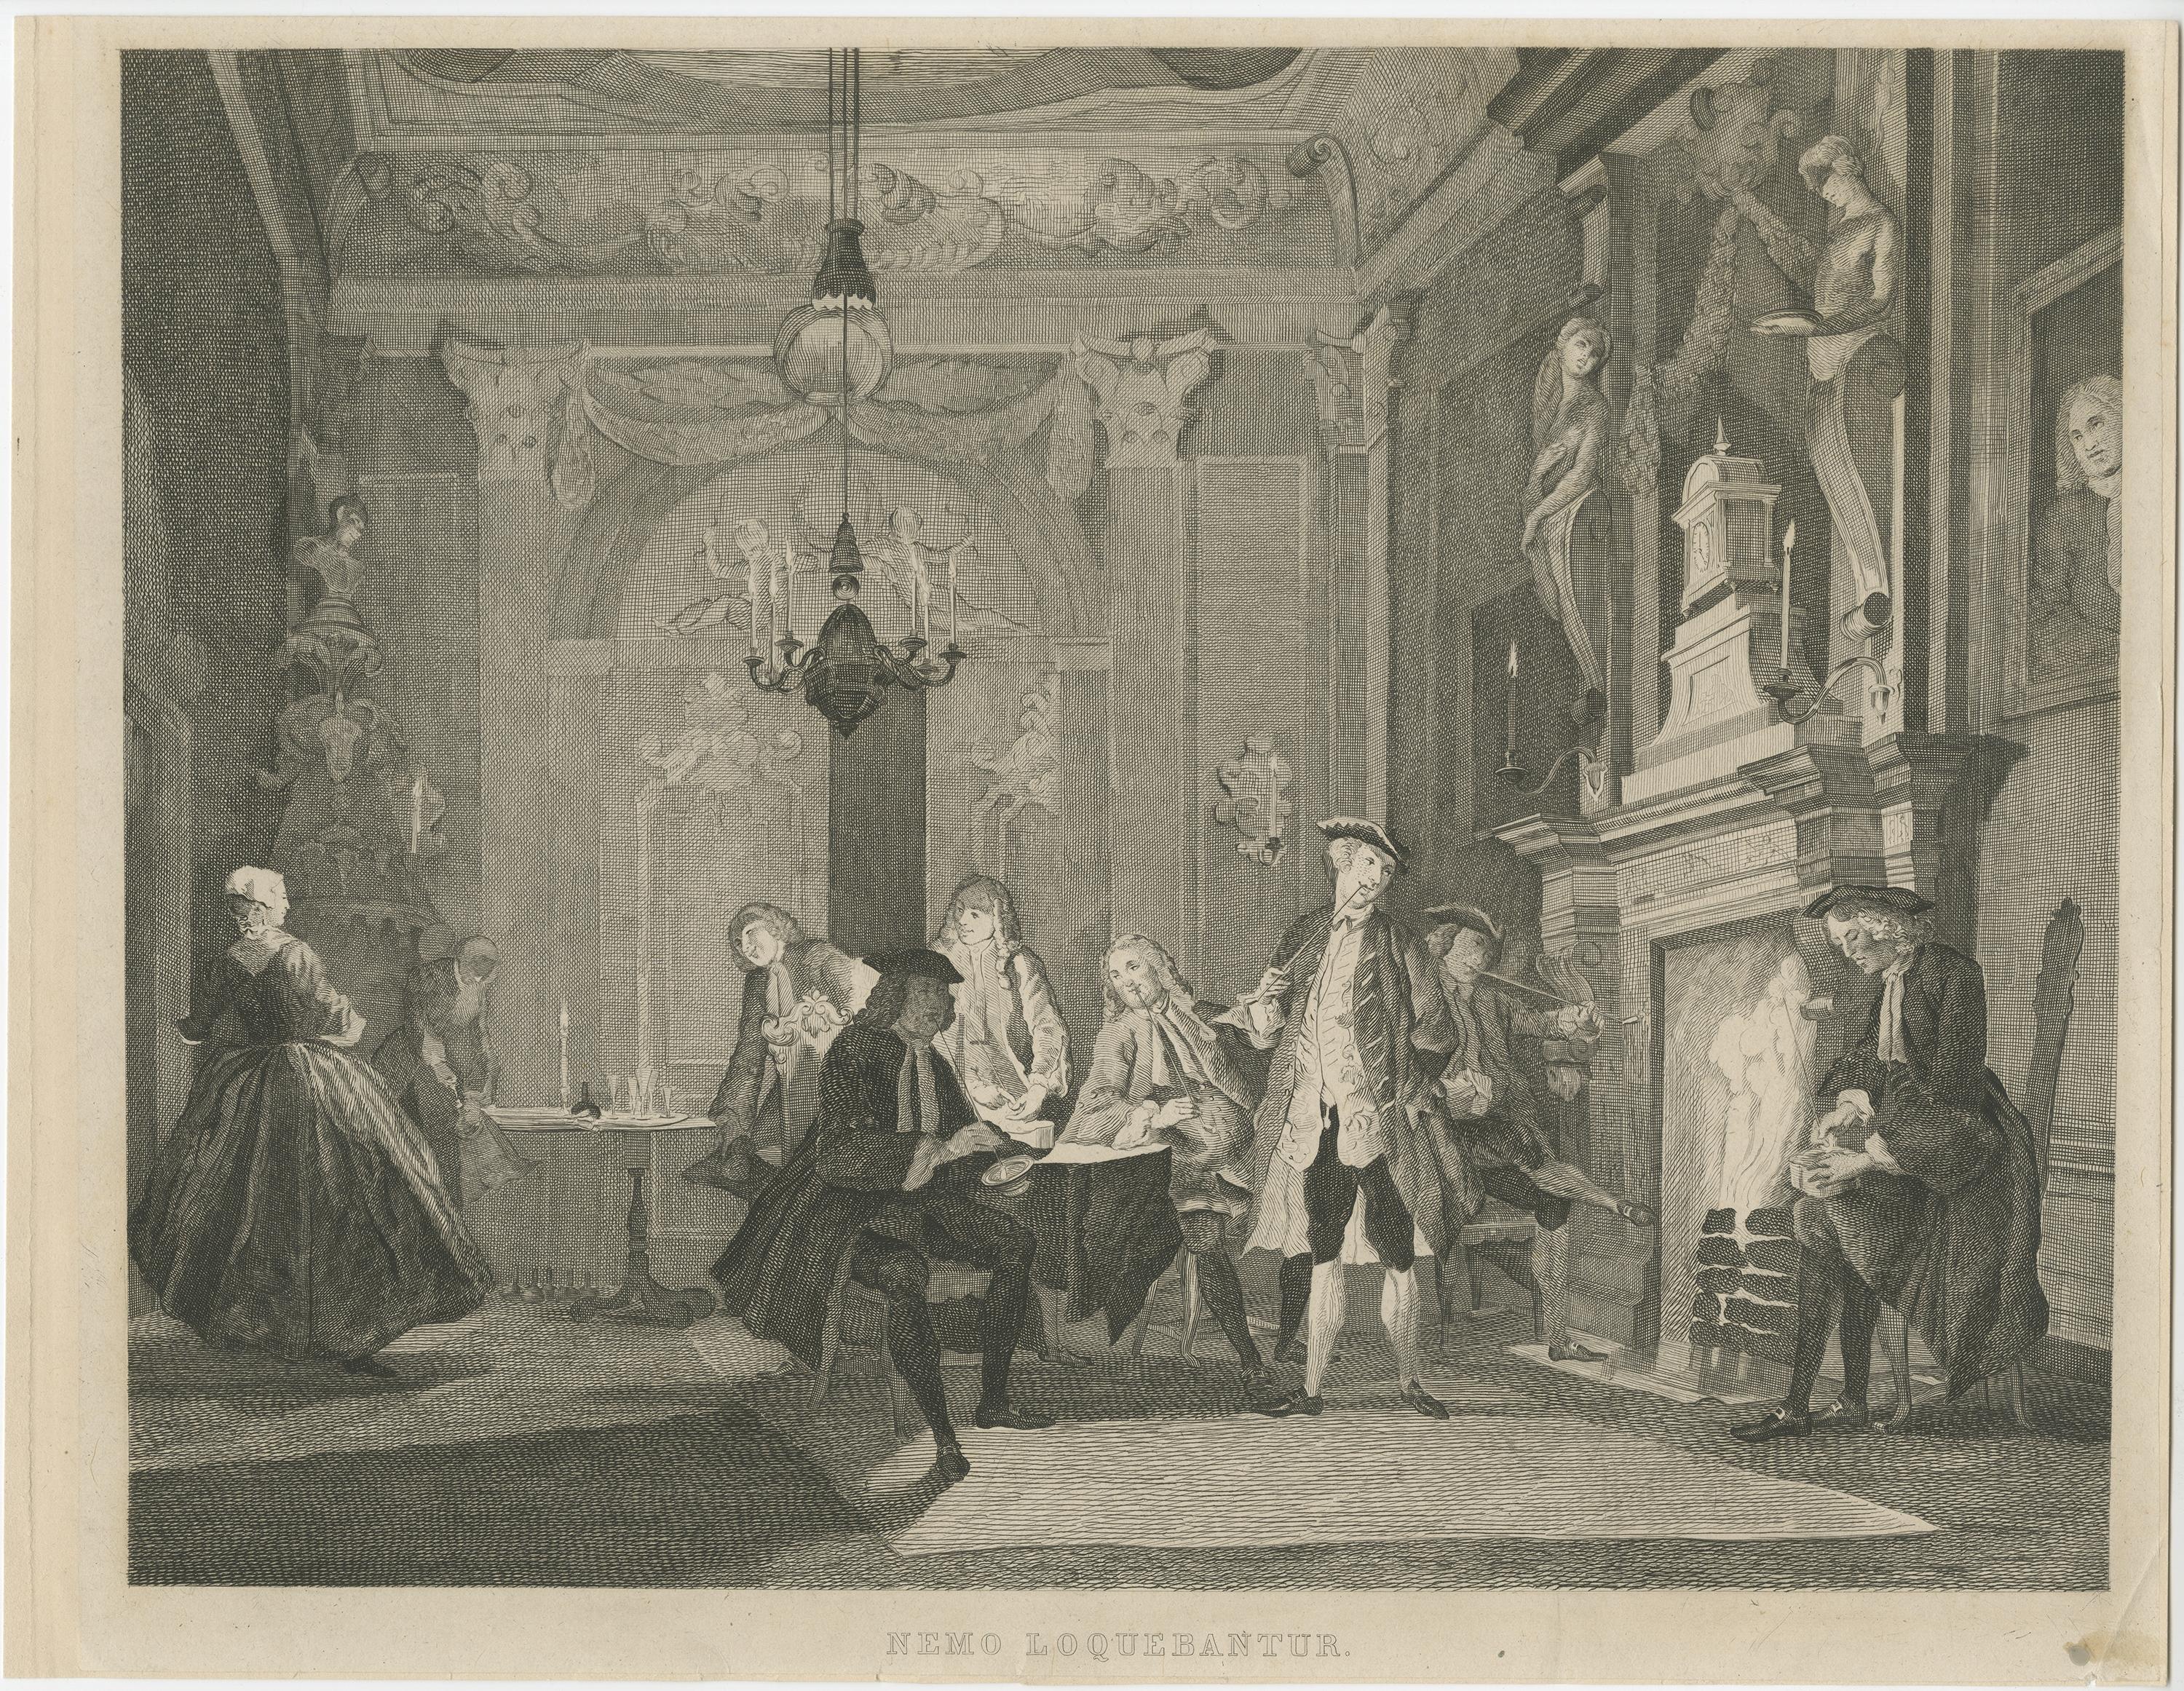 Antique print titled 'Nemo Loquebantur'. 

Etching on chine collé after the painting by Cornelis Troost. It shows a Dutch interior with a group of Dutch friends gathered in the house of Biberius by night; some men seated around a table, while